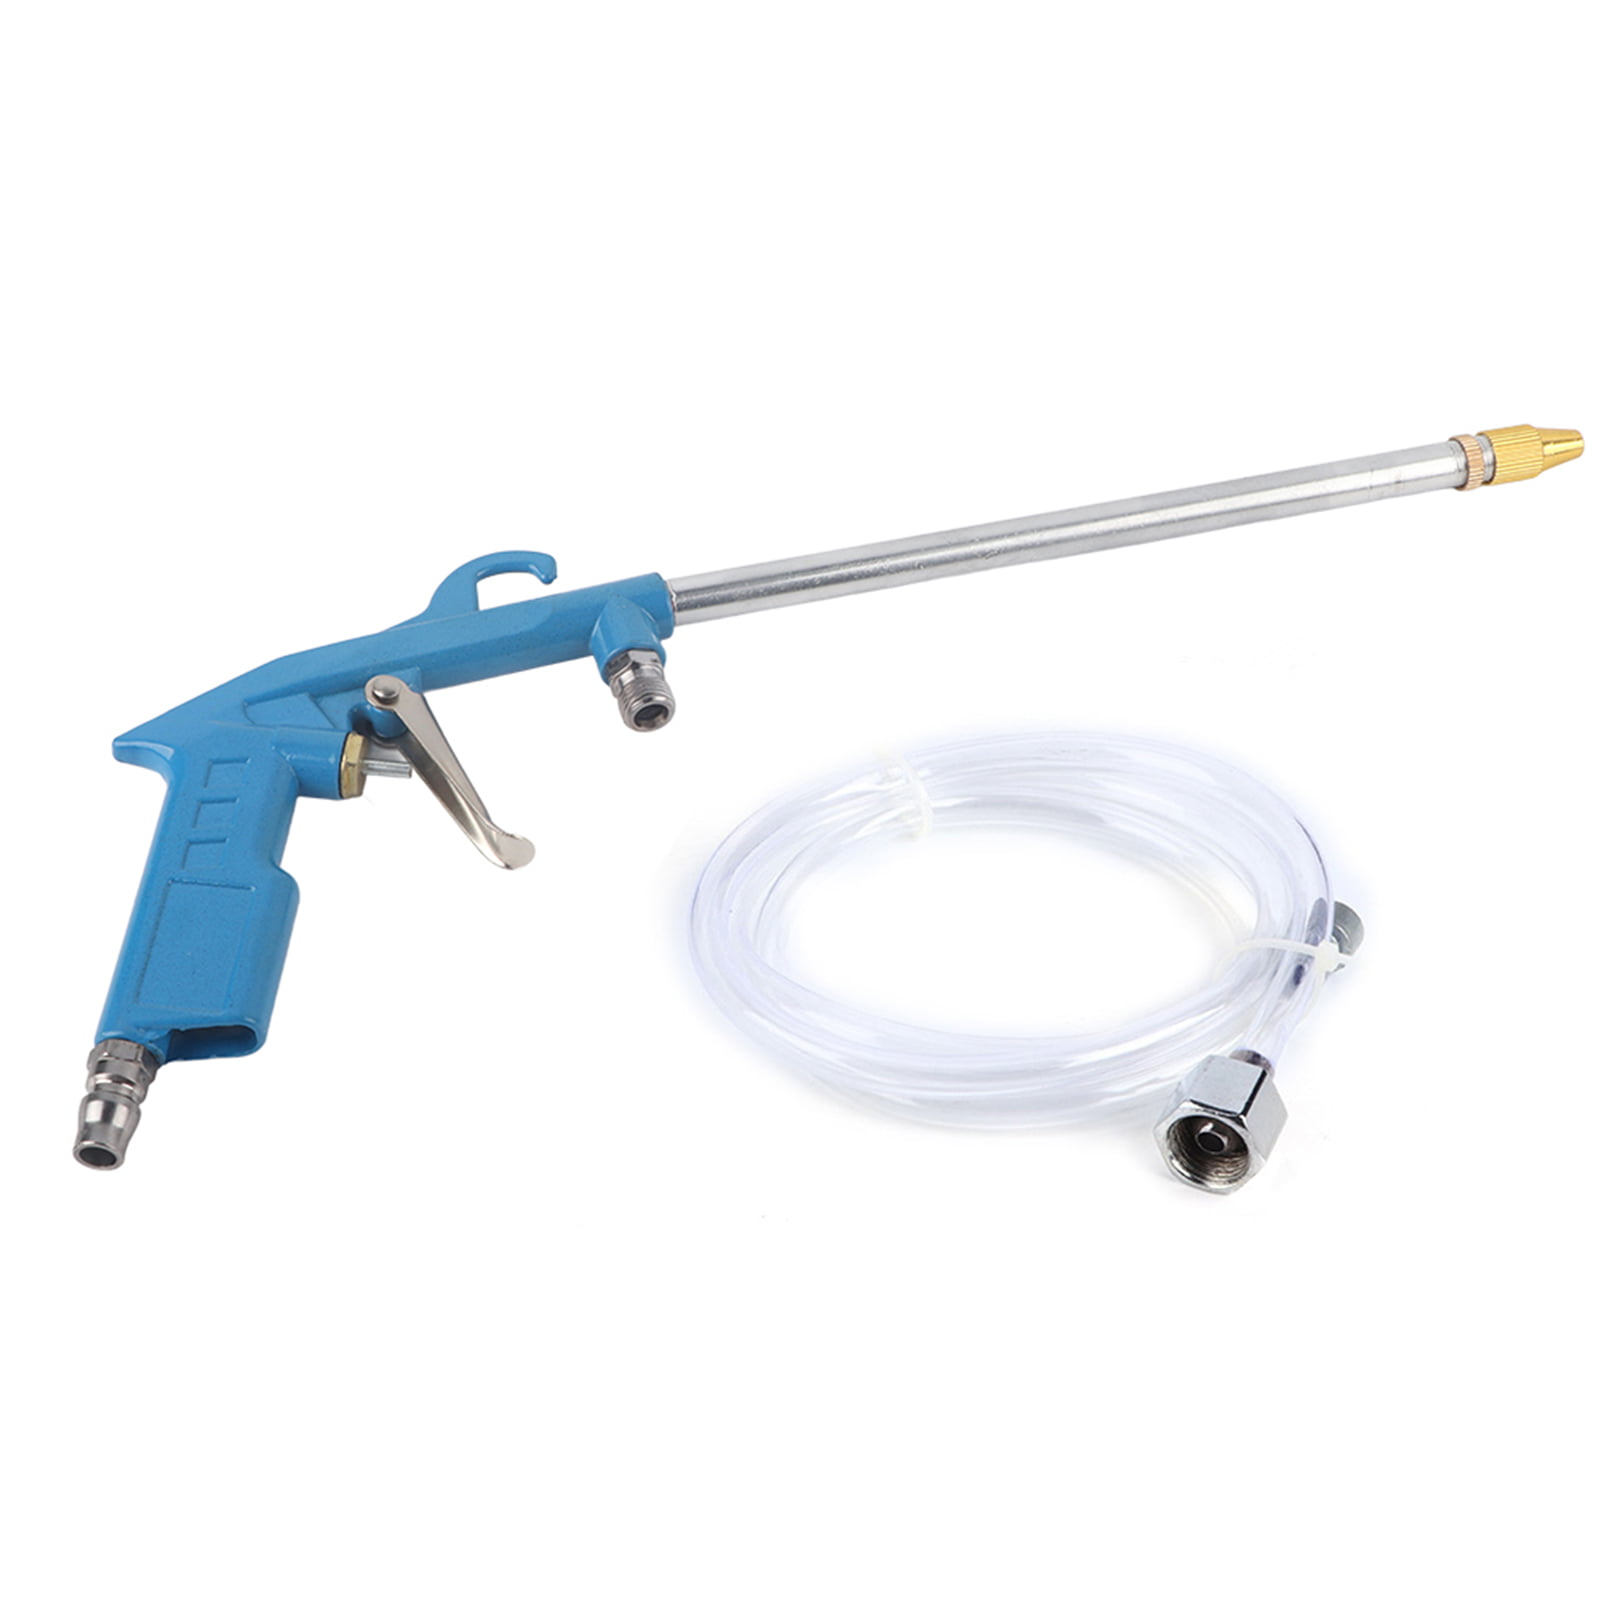 AIR ENGINE CNING WASHER GUN TOOL WITH 6' SIPHON HOSE CNER ACCESSORIES 